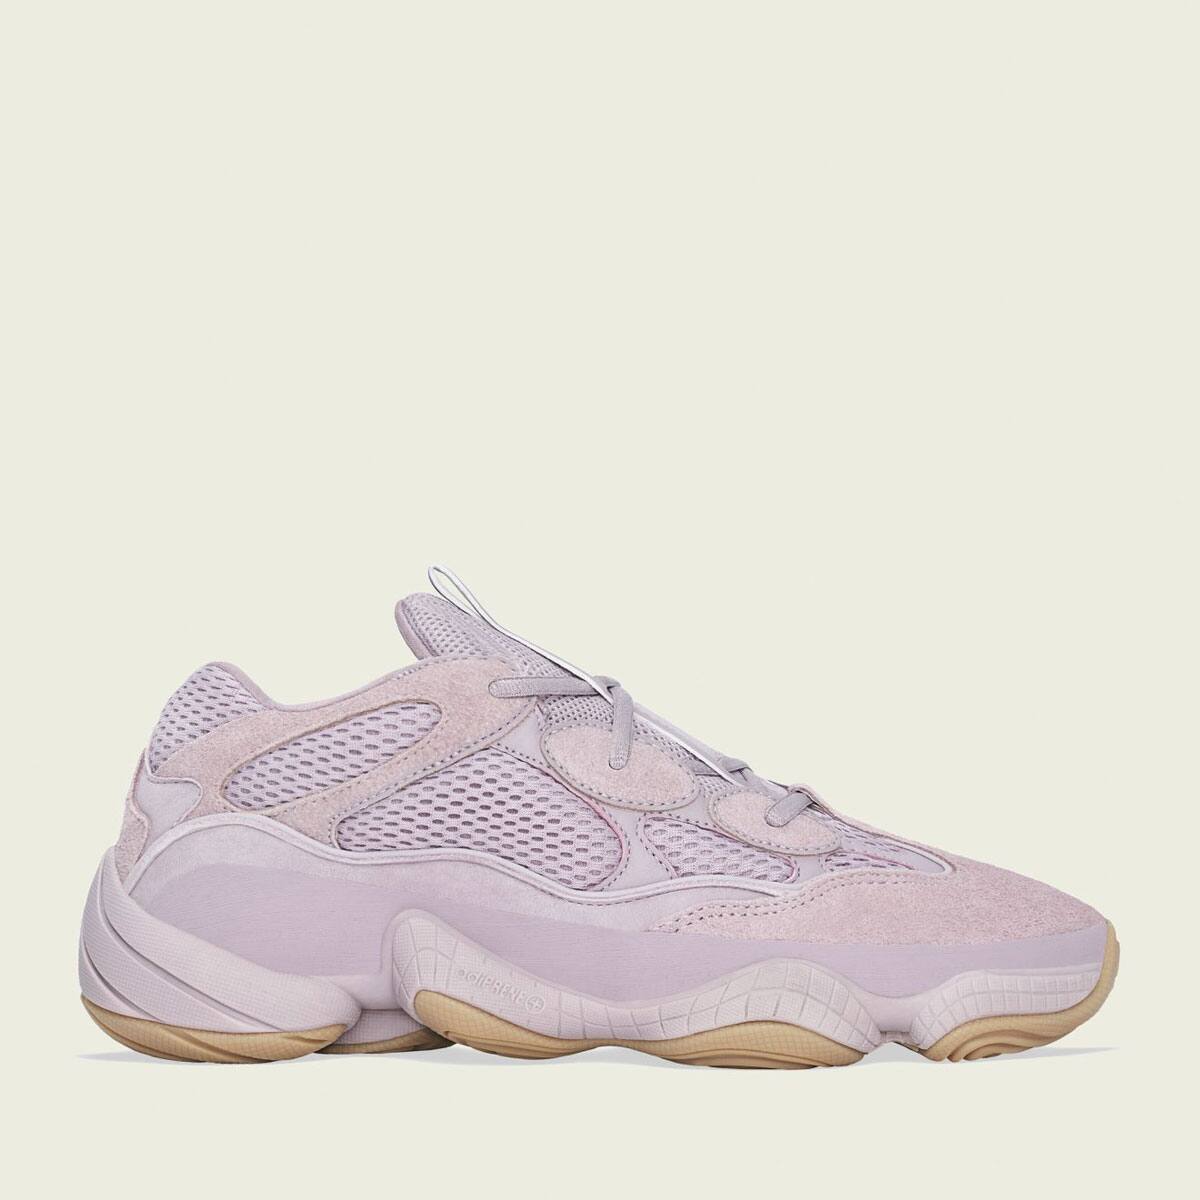 adidas YEEZY 500 "SOFT VISION" GRAY 19FW-S_photo_large